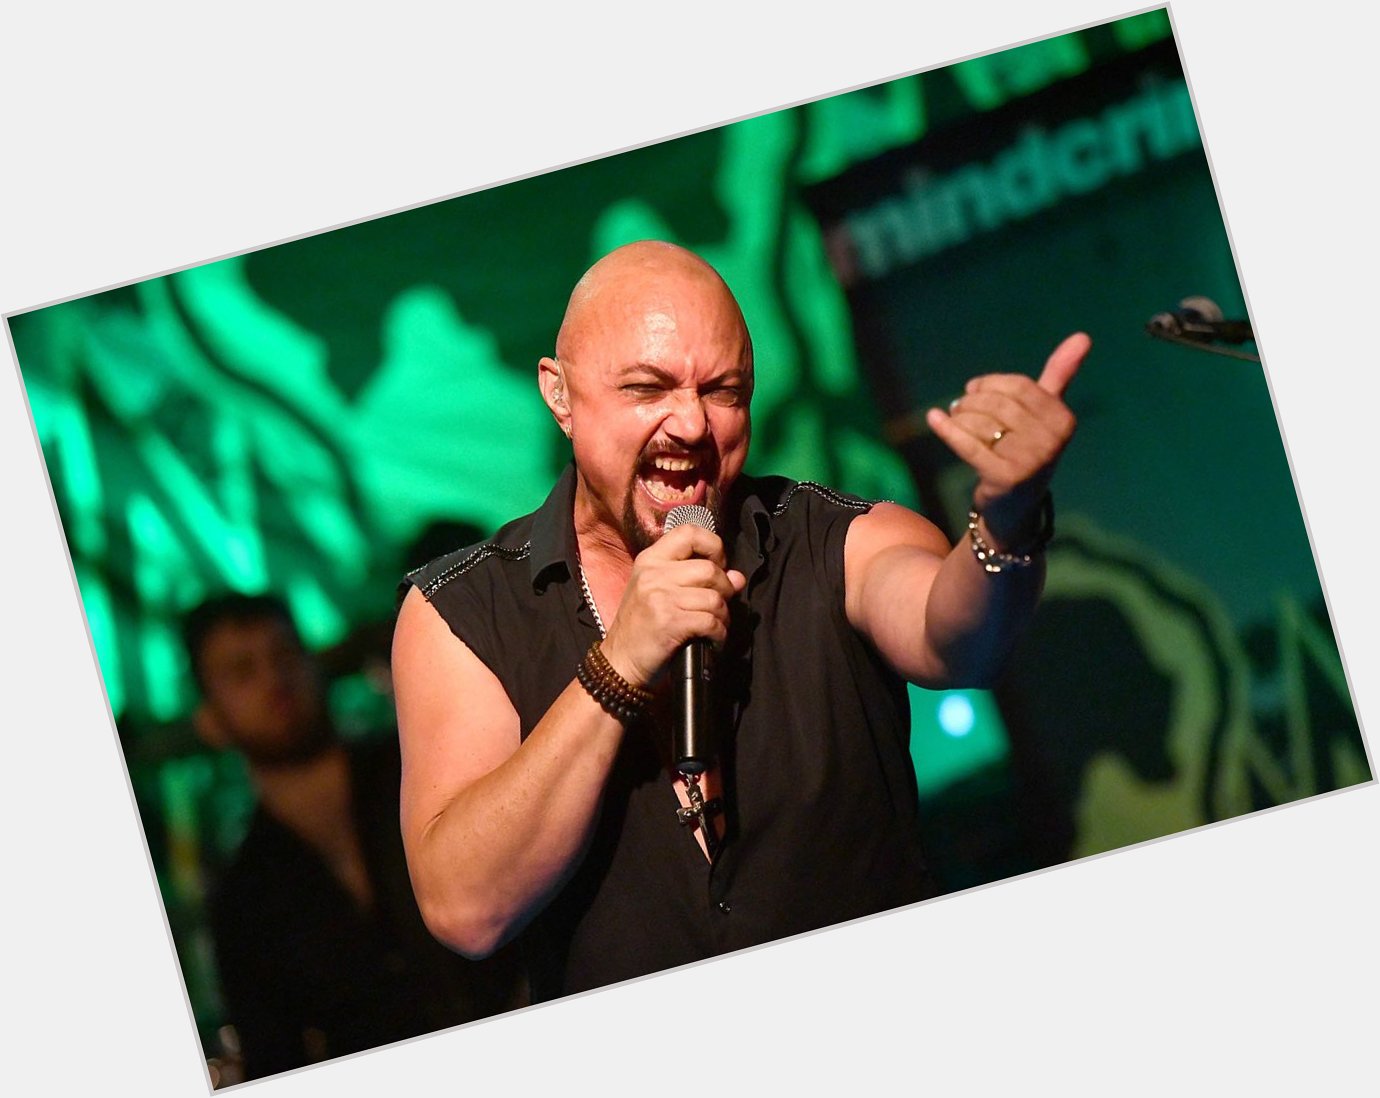 The guys from wish Geoff Tate a Happy Birthday! 